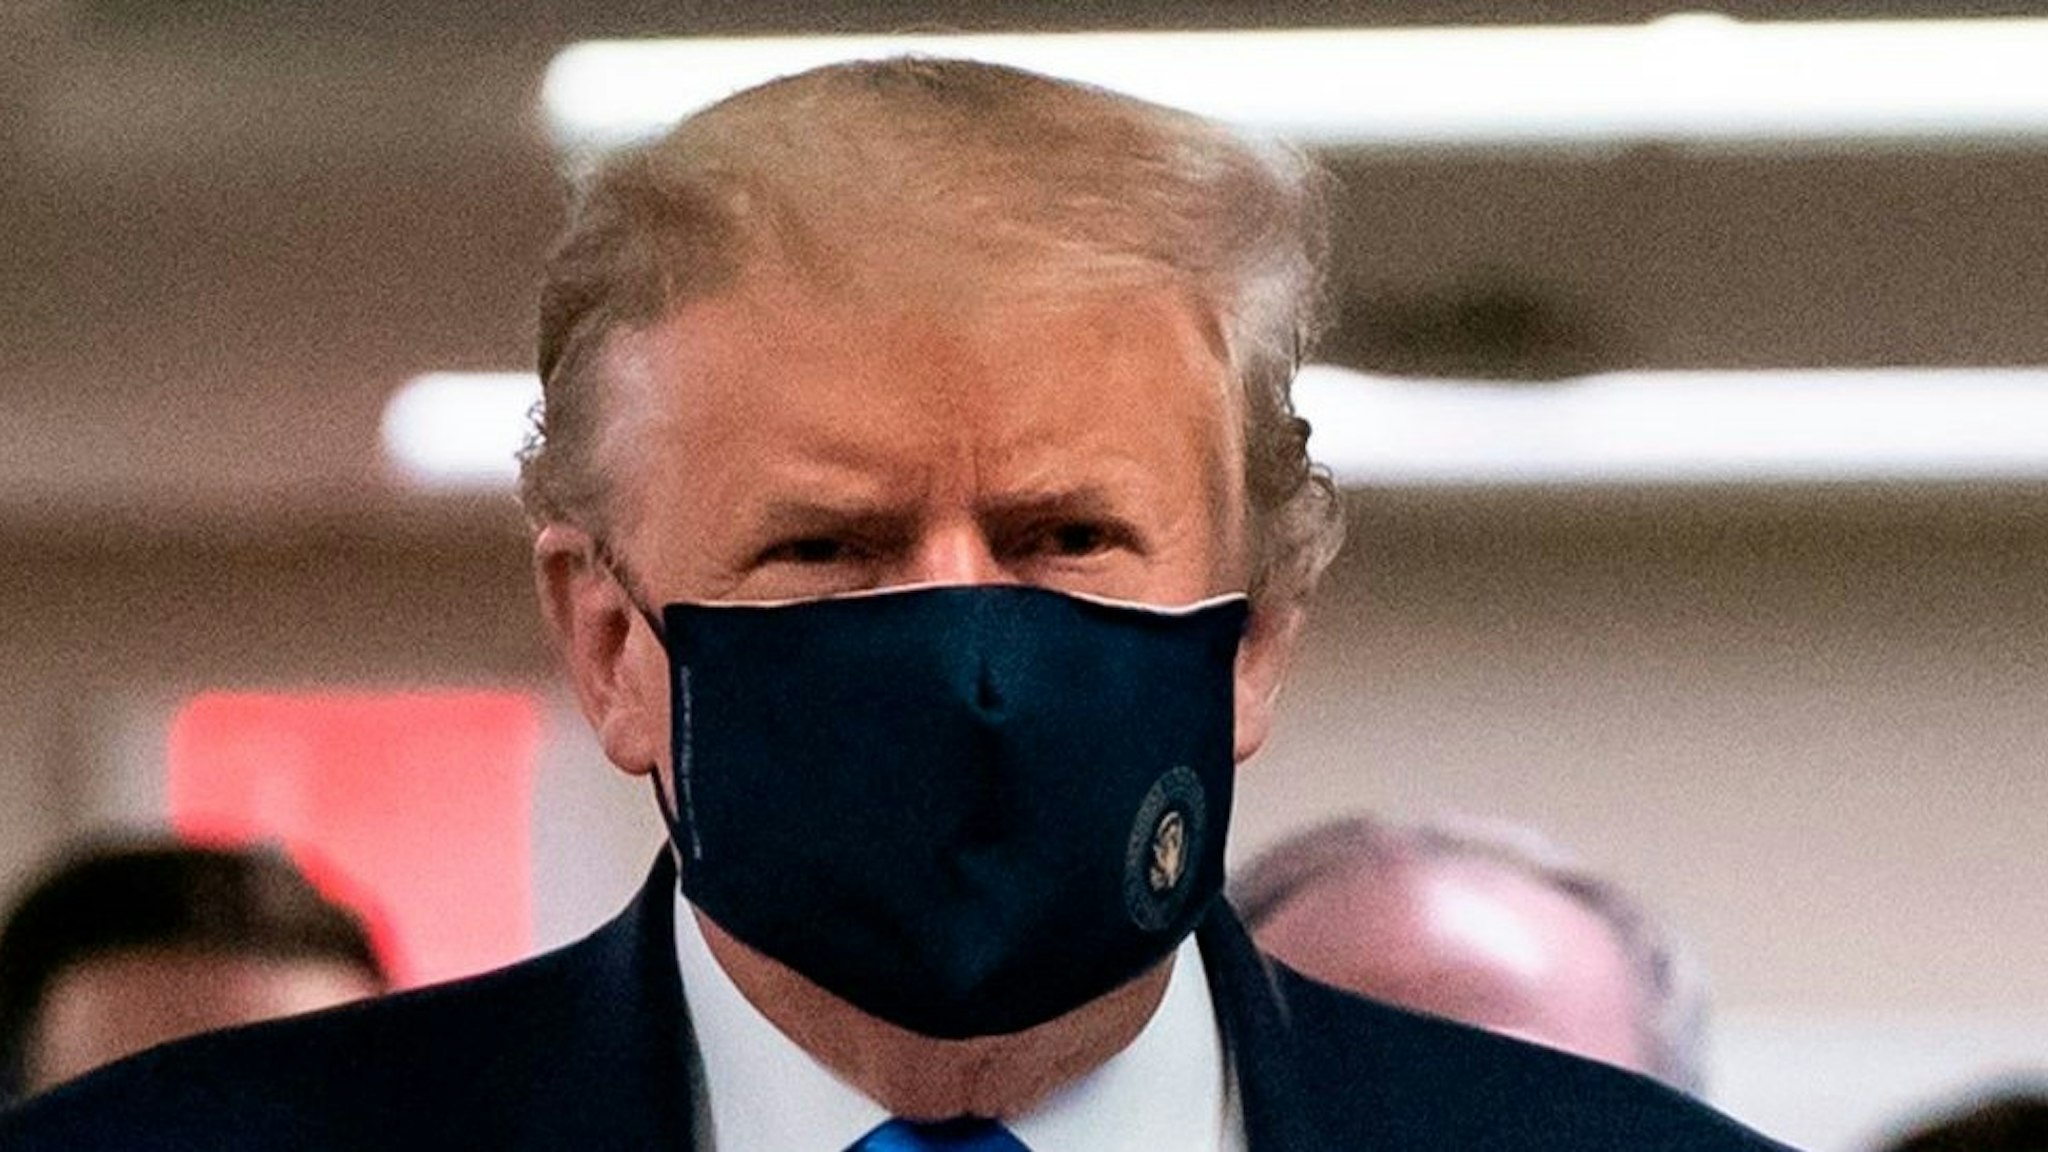 US President Donald Trump wears a mask as he visits Walter Reed National Military Medical Center in Bethesda, Maryland' on July 11, 2020. (Photo by ALEX EDELMAN / AFP) (Photo by